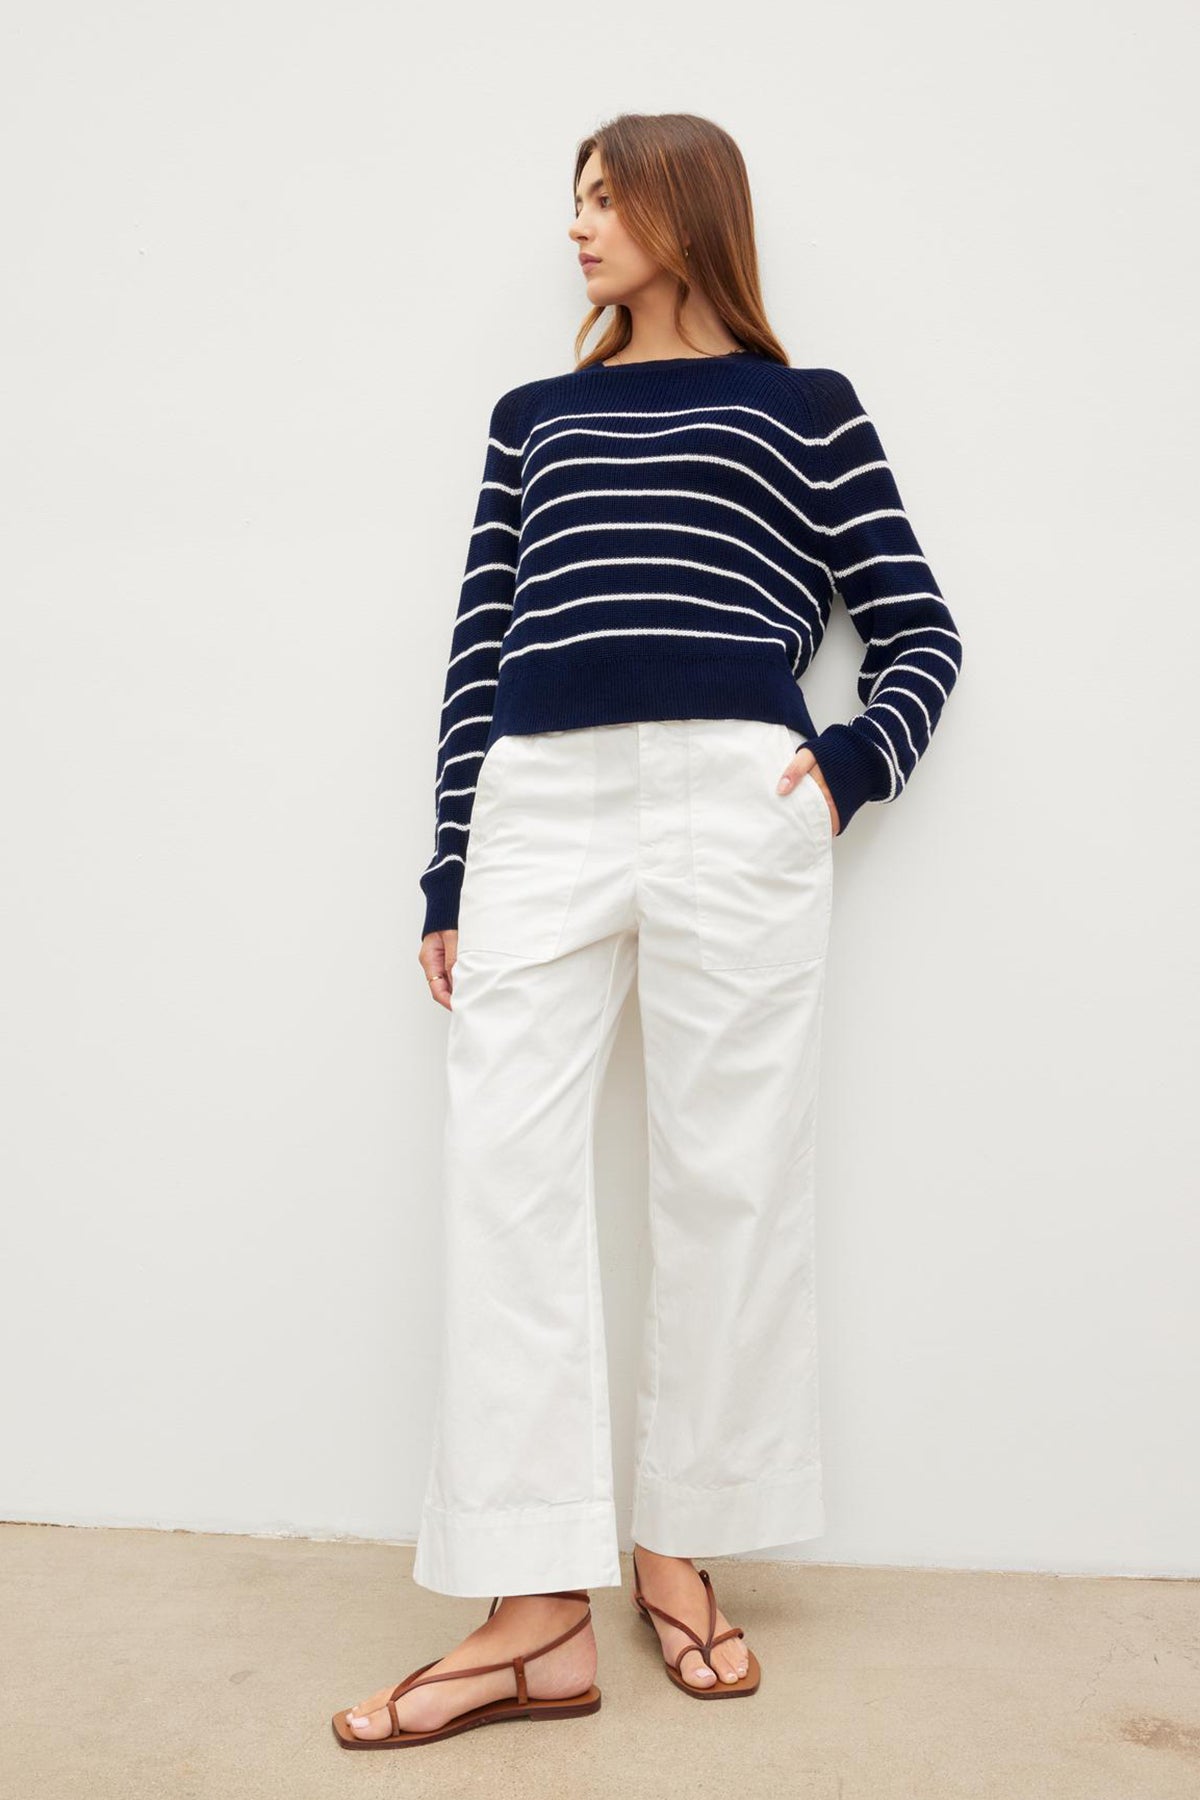 The model is wearing a navy striped sweater and white flared leg MYA COTTON CANVAS PANTS by Velvet by Graham & Spencer.-36161278148801